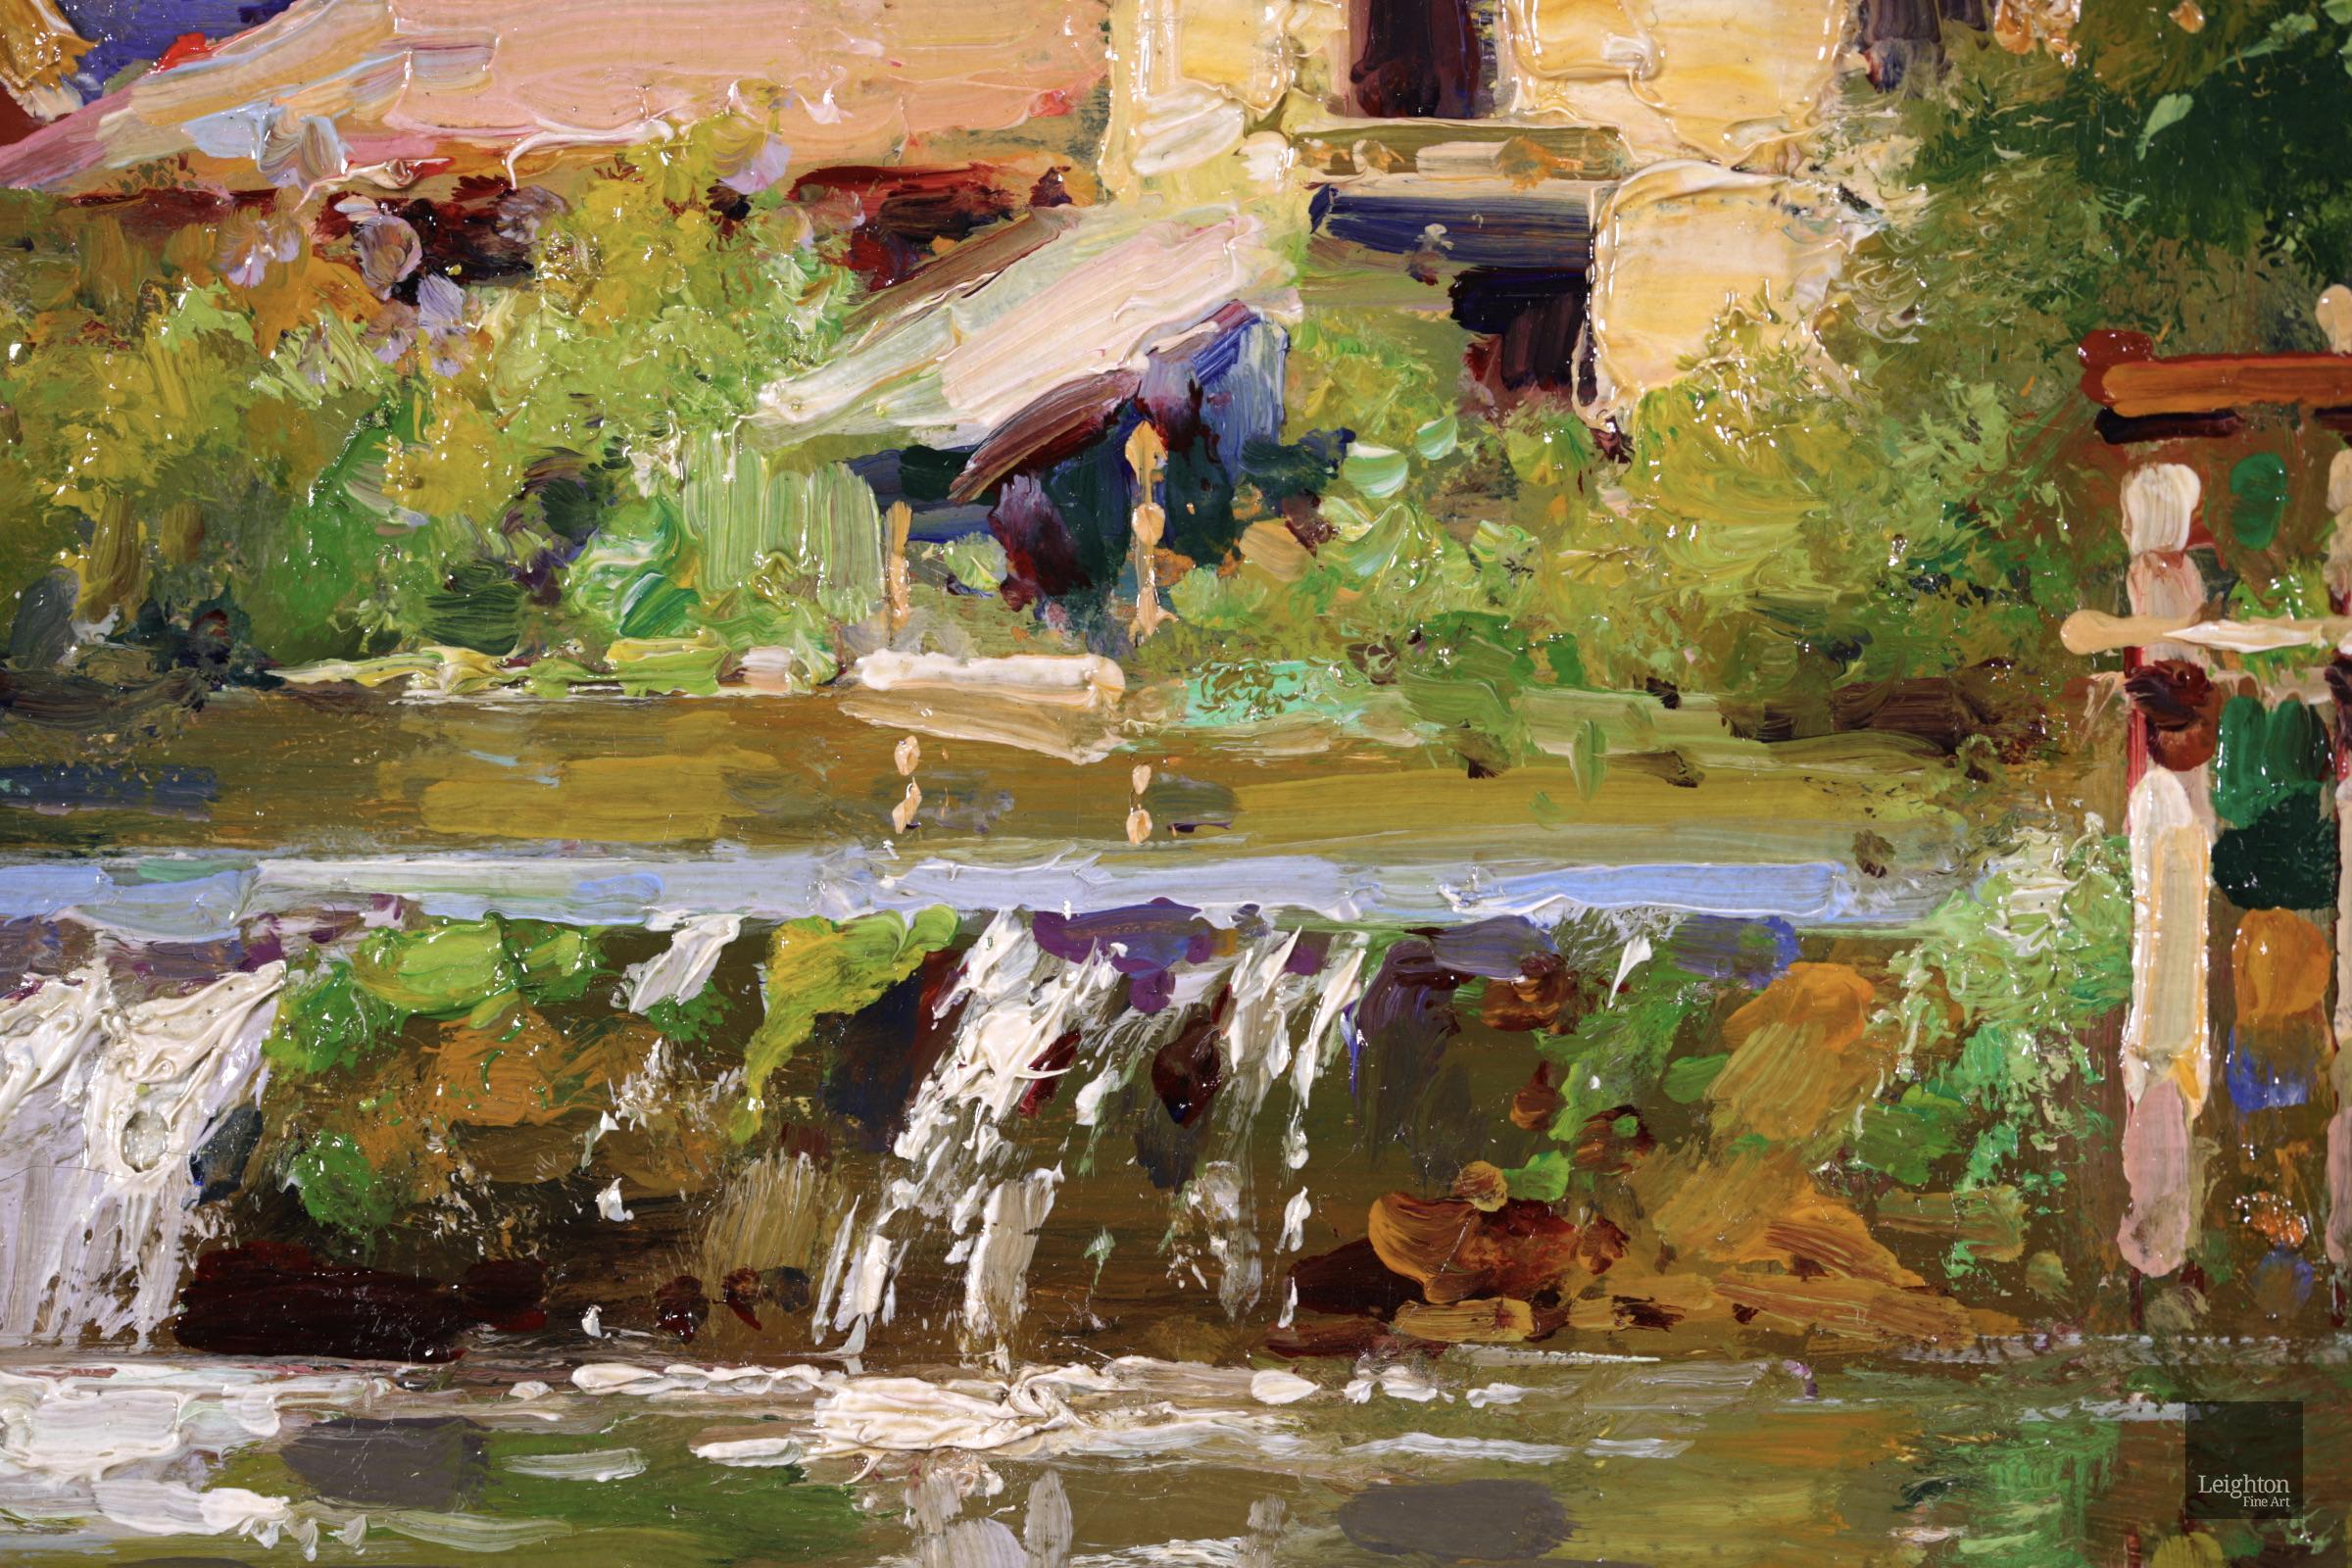 Signed landscape oil on canvas circa 1920 by French impressionist painter Edouard Cortes. This stunning and wonderfully coloured work depicts a view of a watermill at Verneuil in Normandy, France on a sunny summer's day. The running water glistens